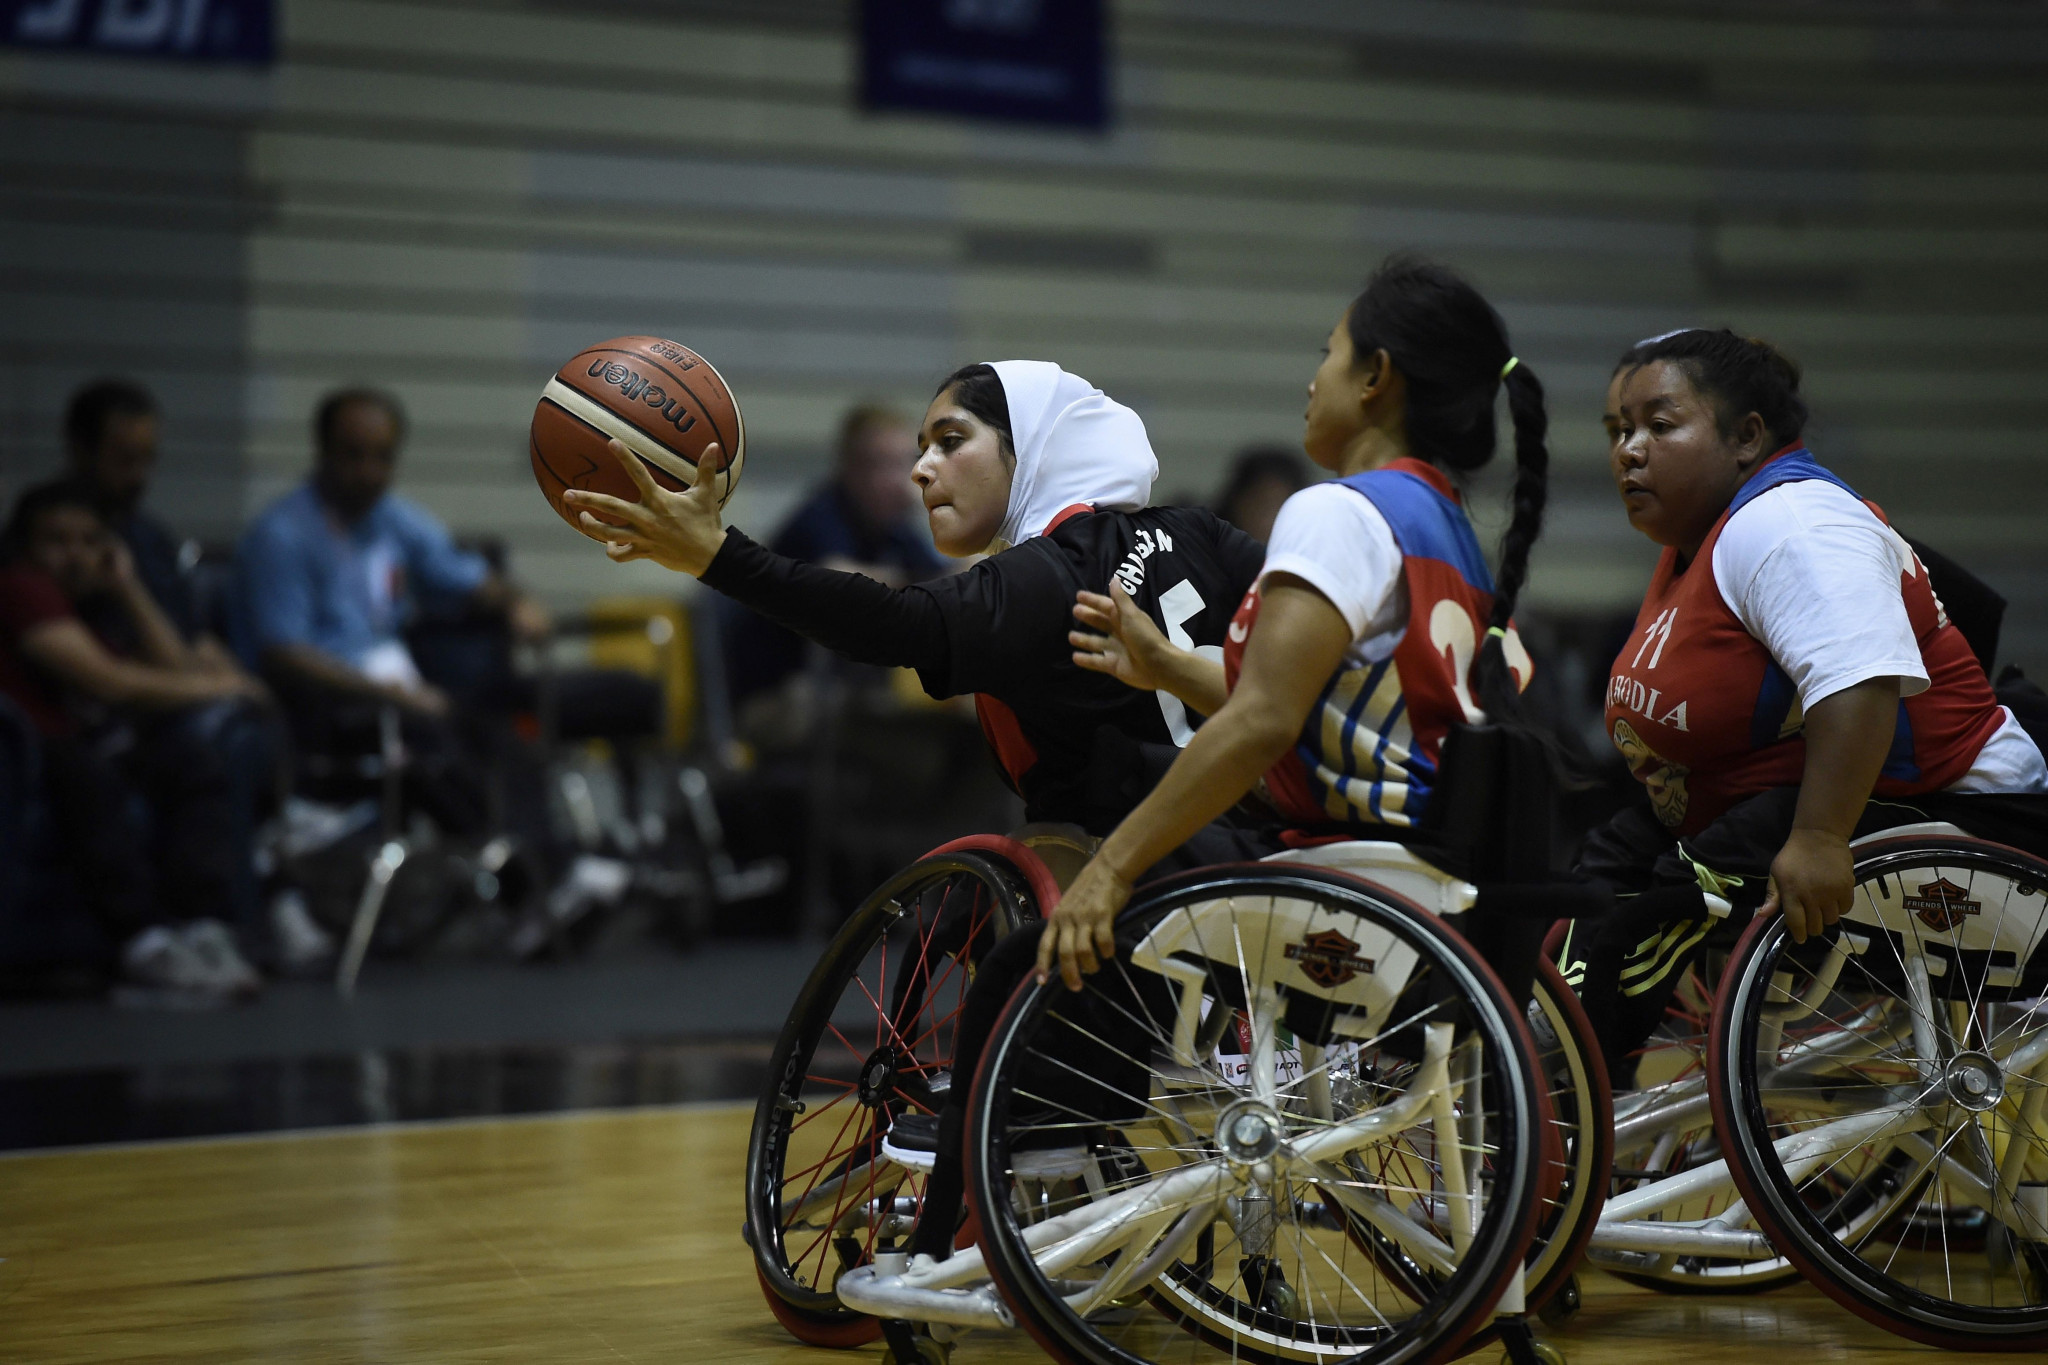 Afghanistan's women's wheelchair basketball team will compete at the 2018 Asian Para Games ©Getty Images